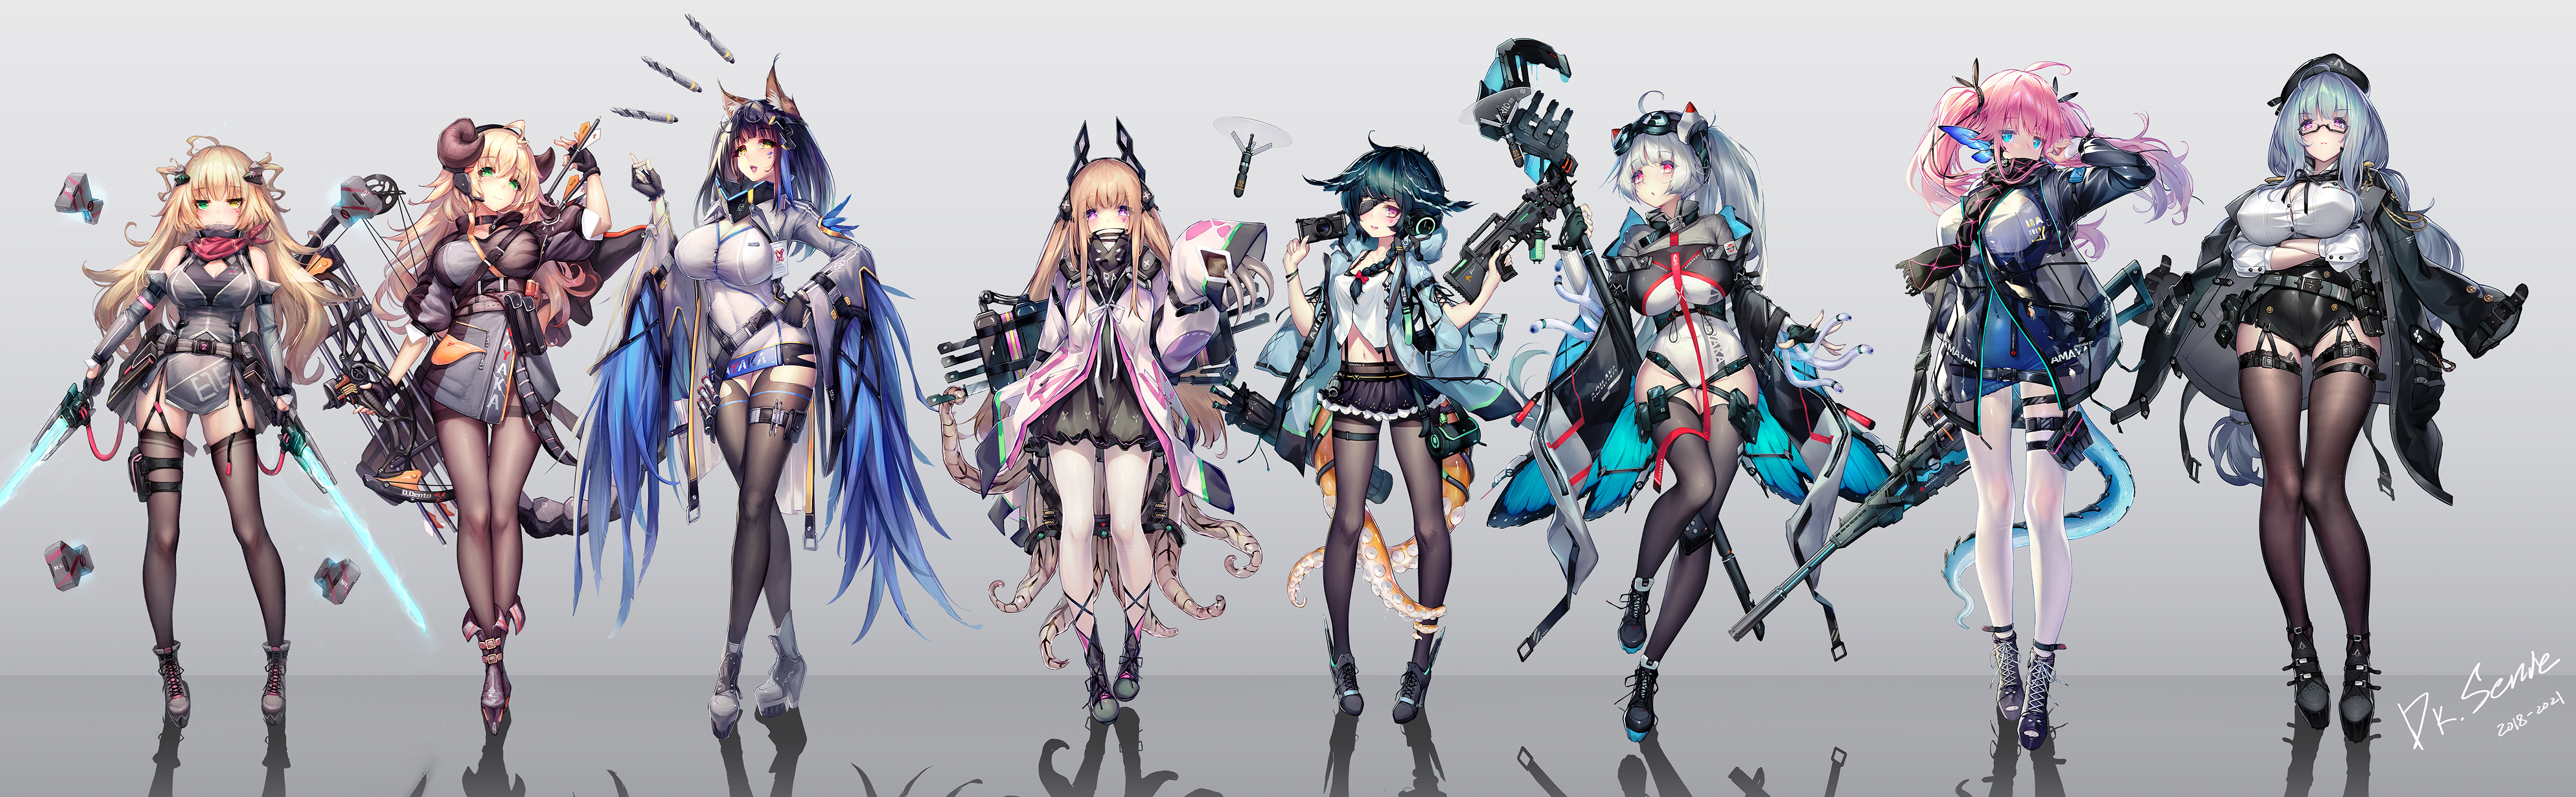 Arknights Anime Girls Anime Group Of Anime Group Of Women 4600x1424